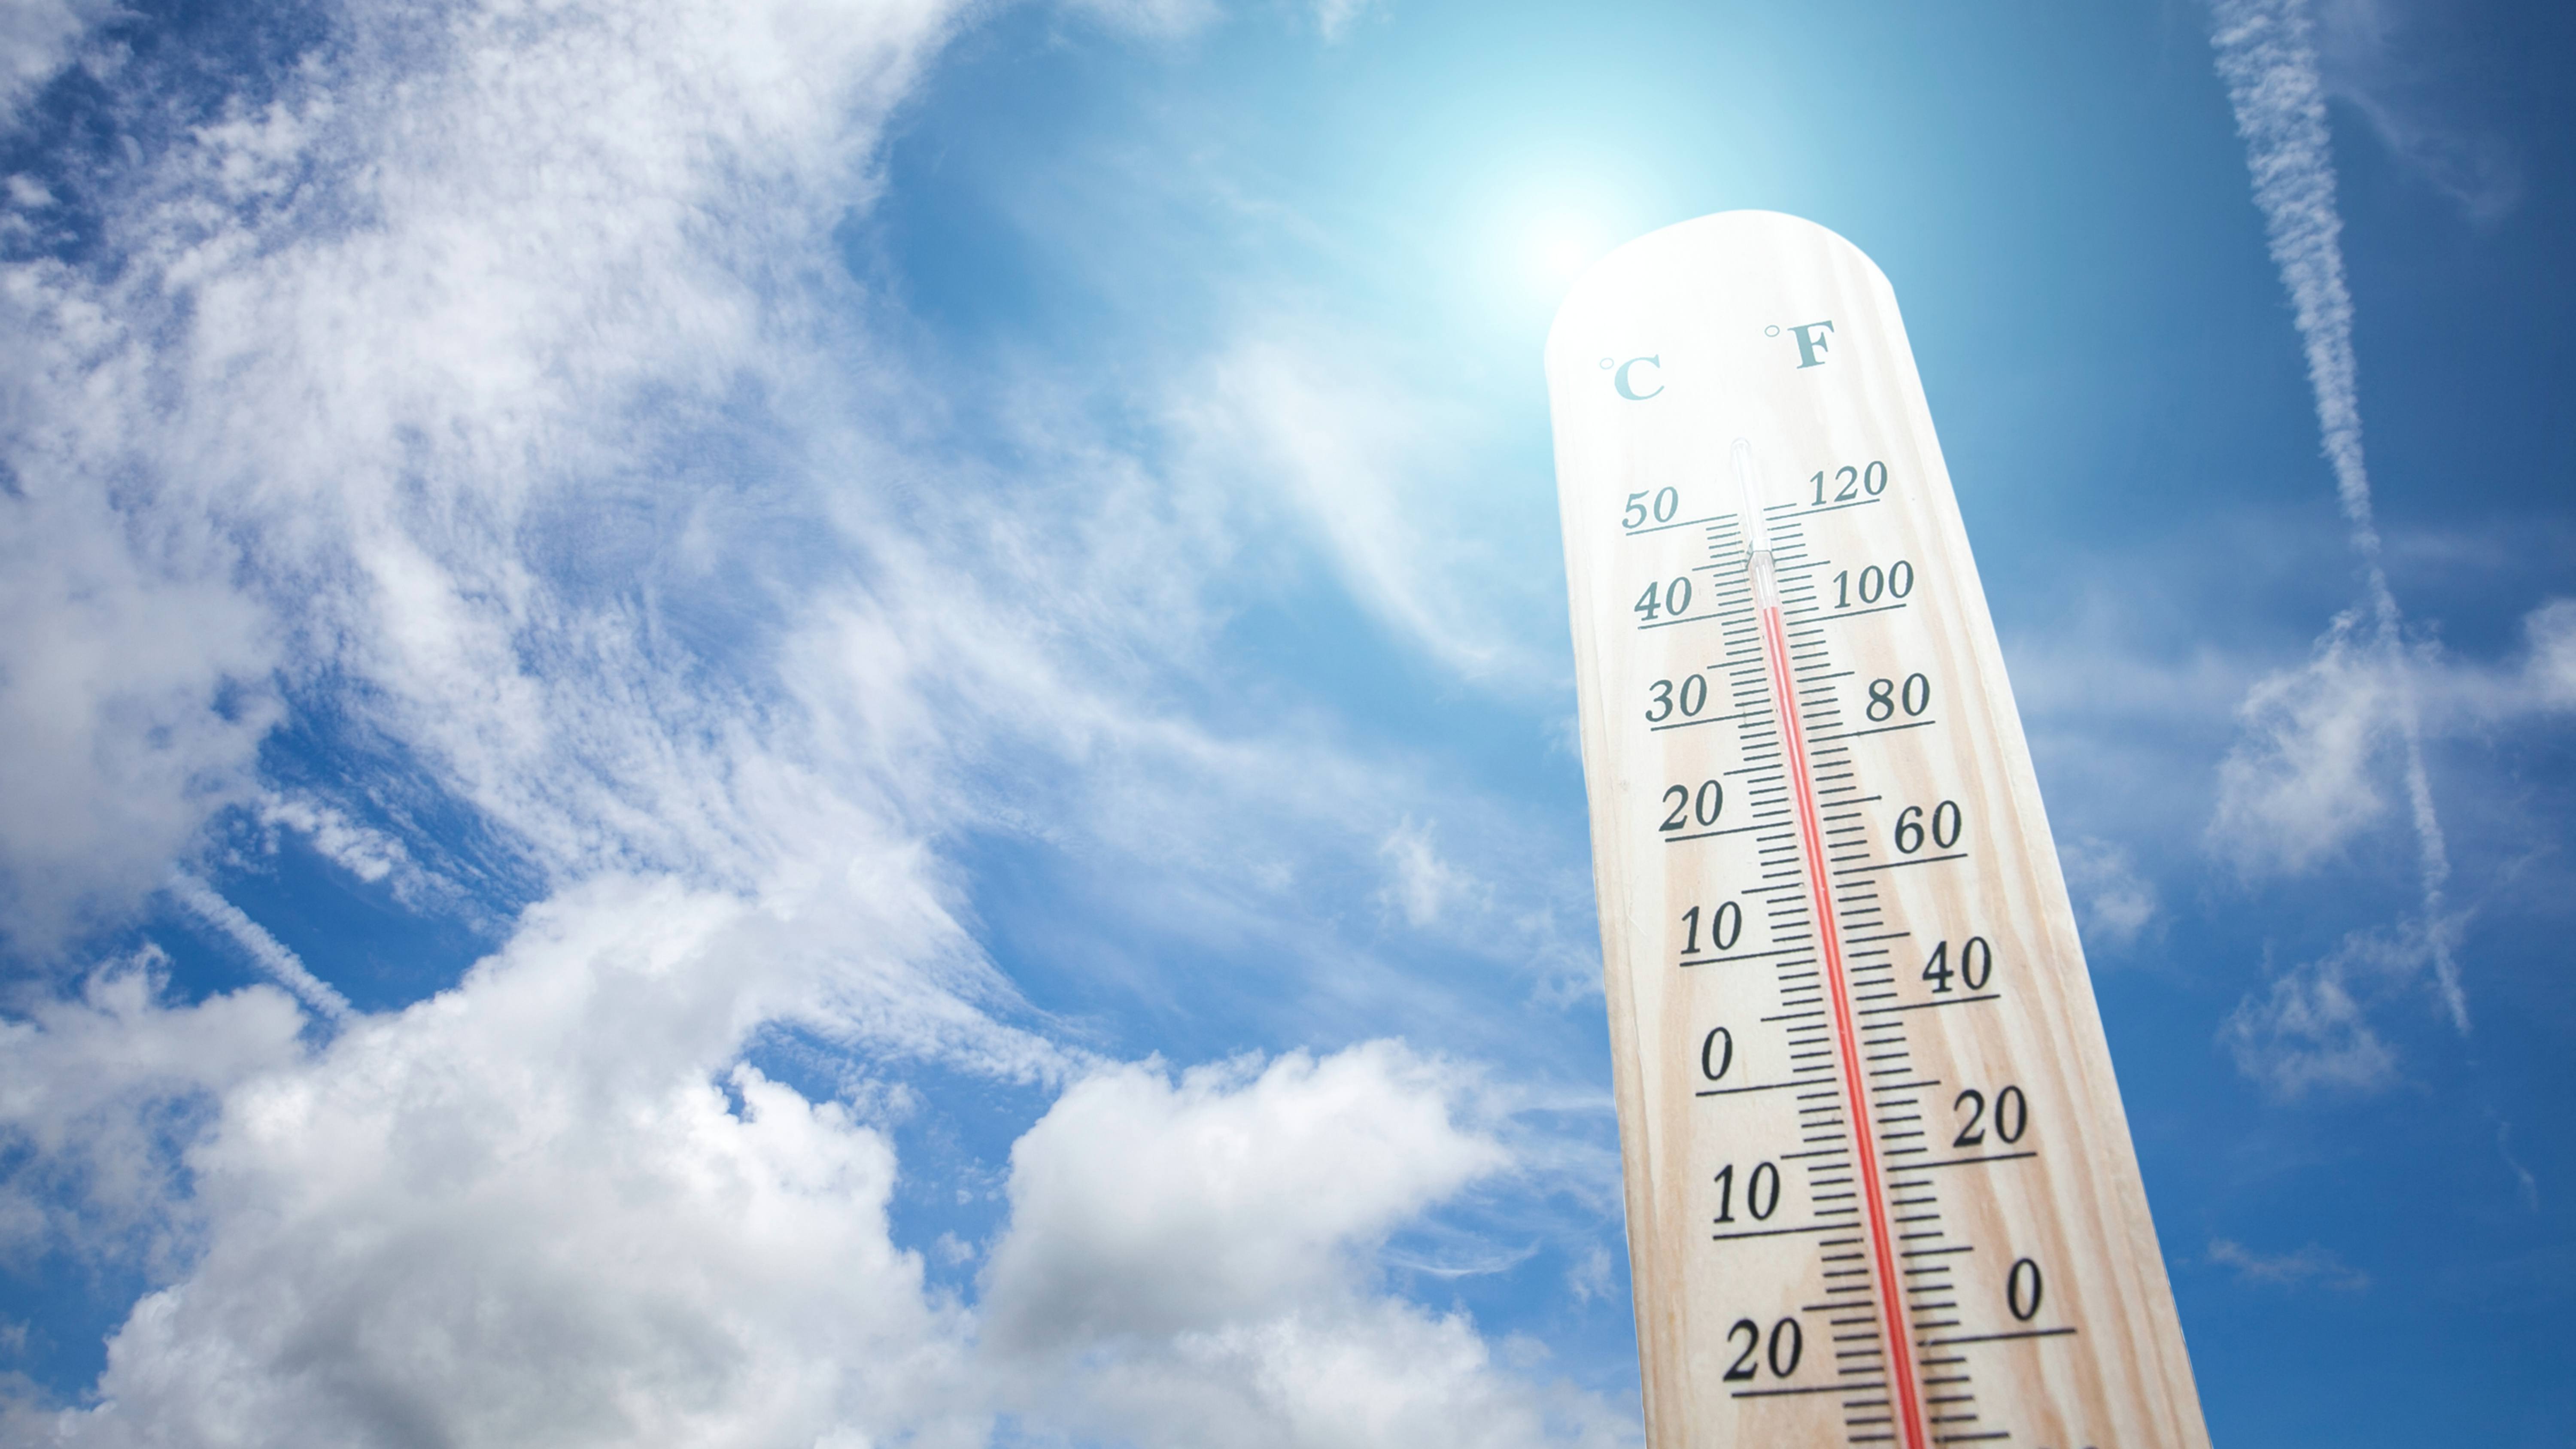 a thermometer on a hot day against a blue sky and sunshine, with high temperature readings, perhaps during a heatwave